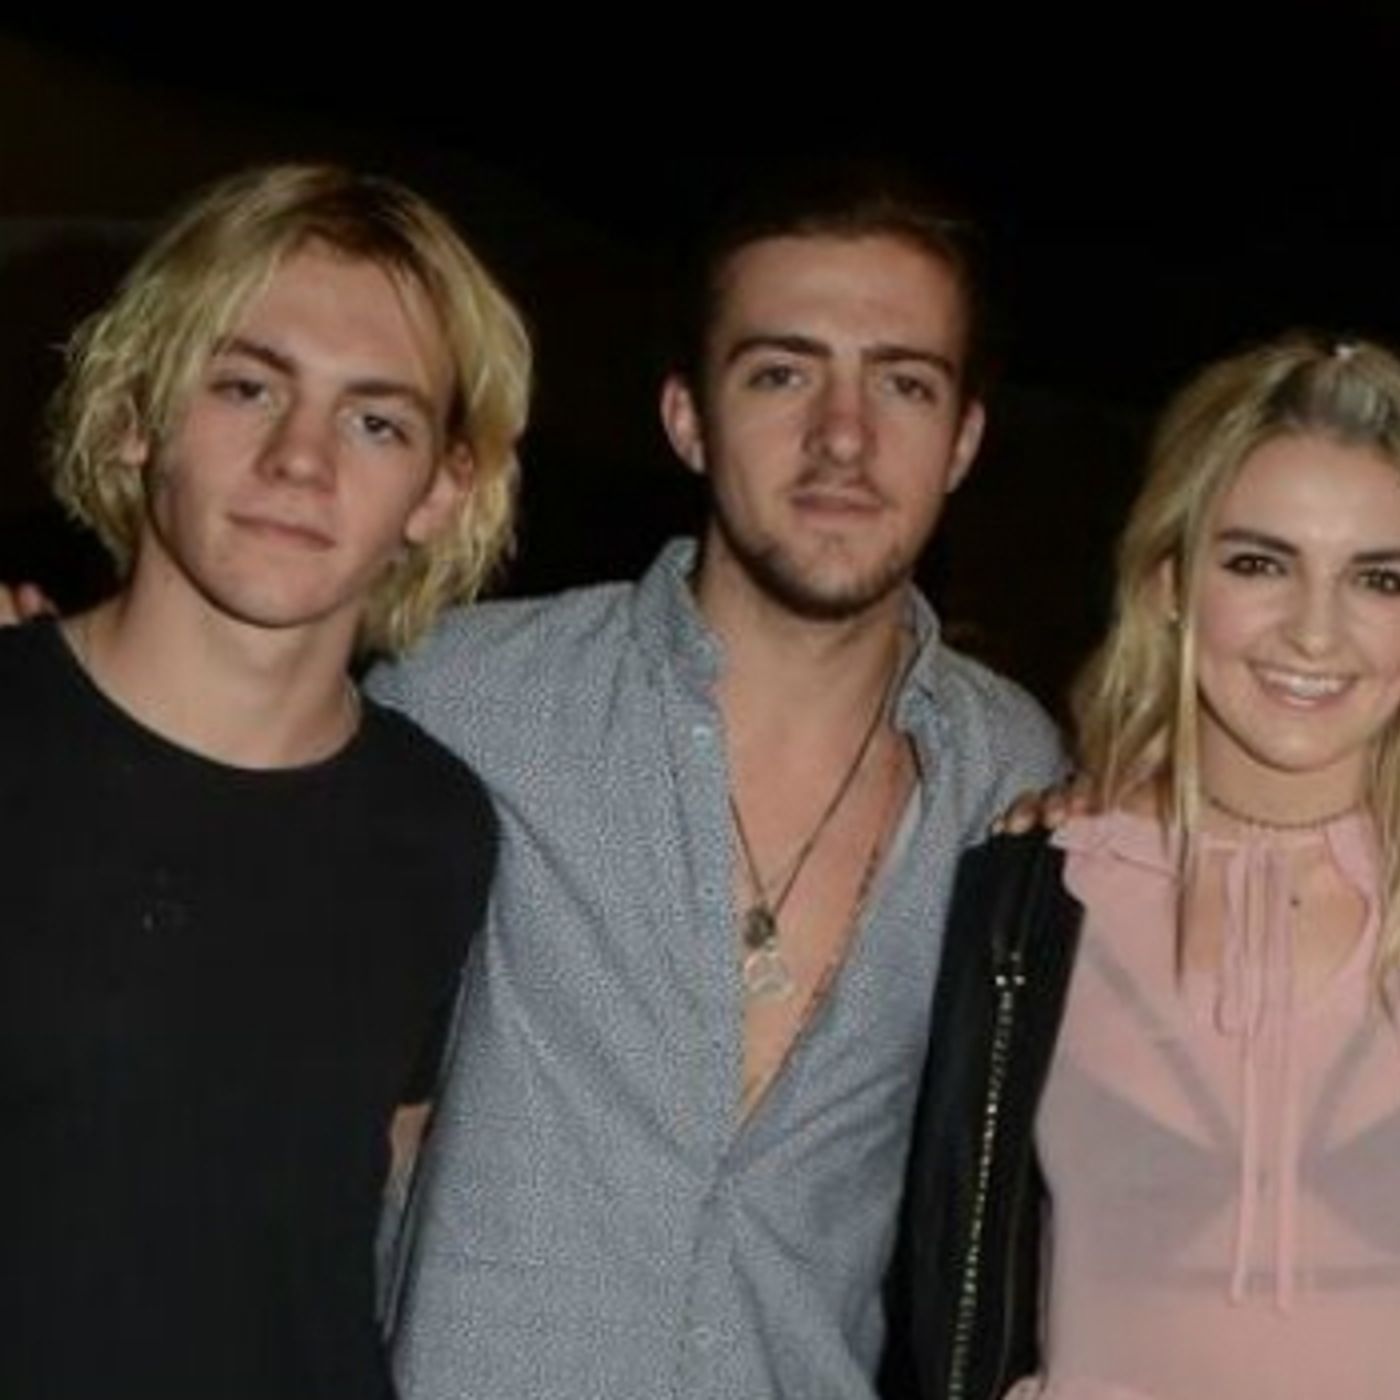 R5 Backstage at the AMAs